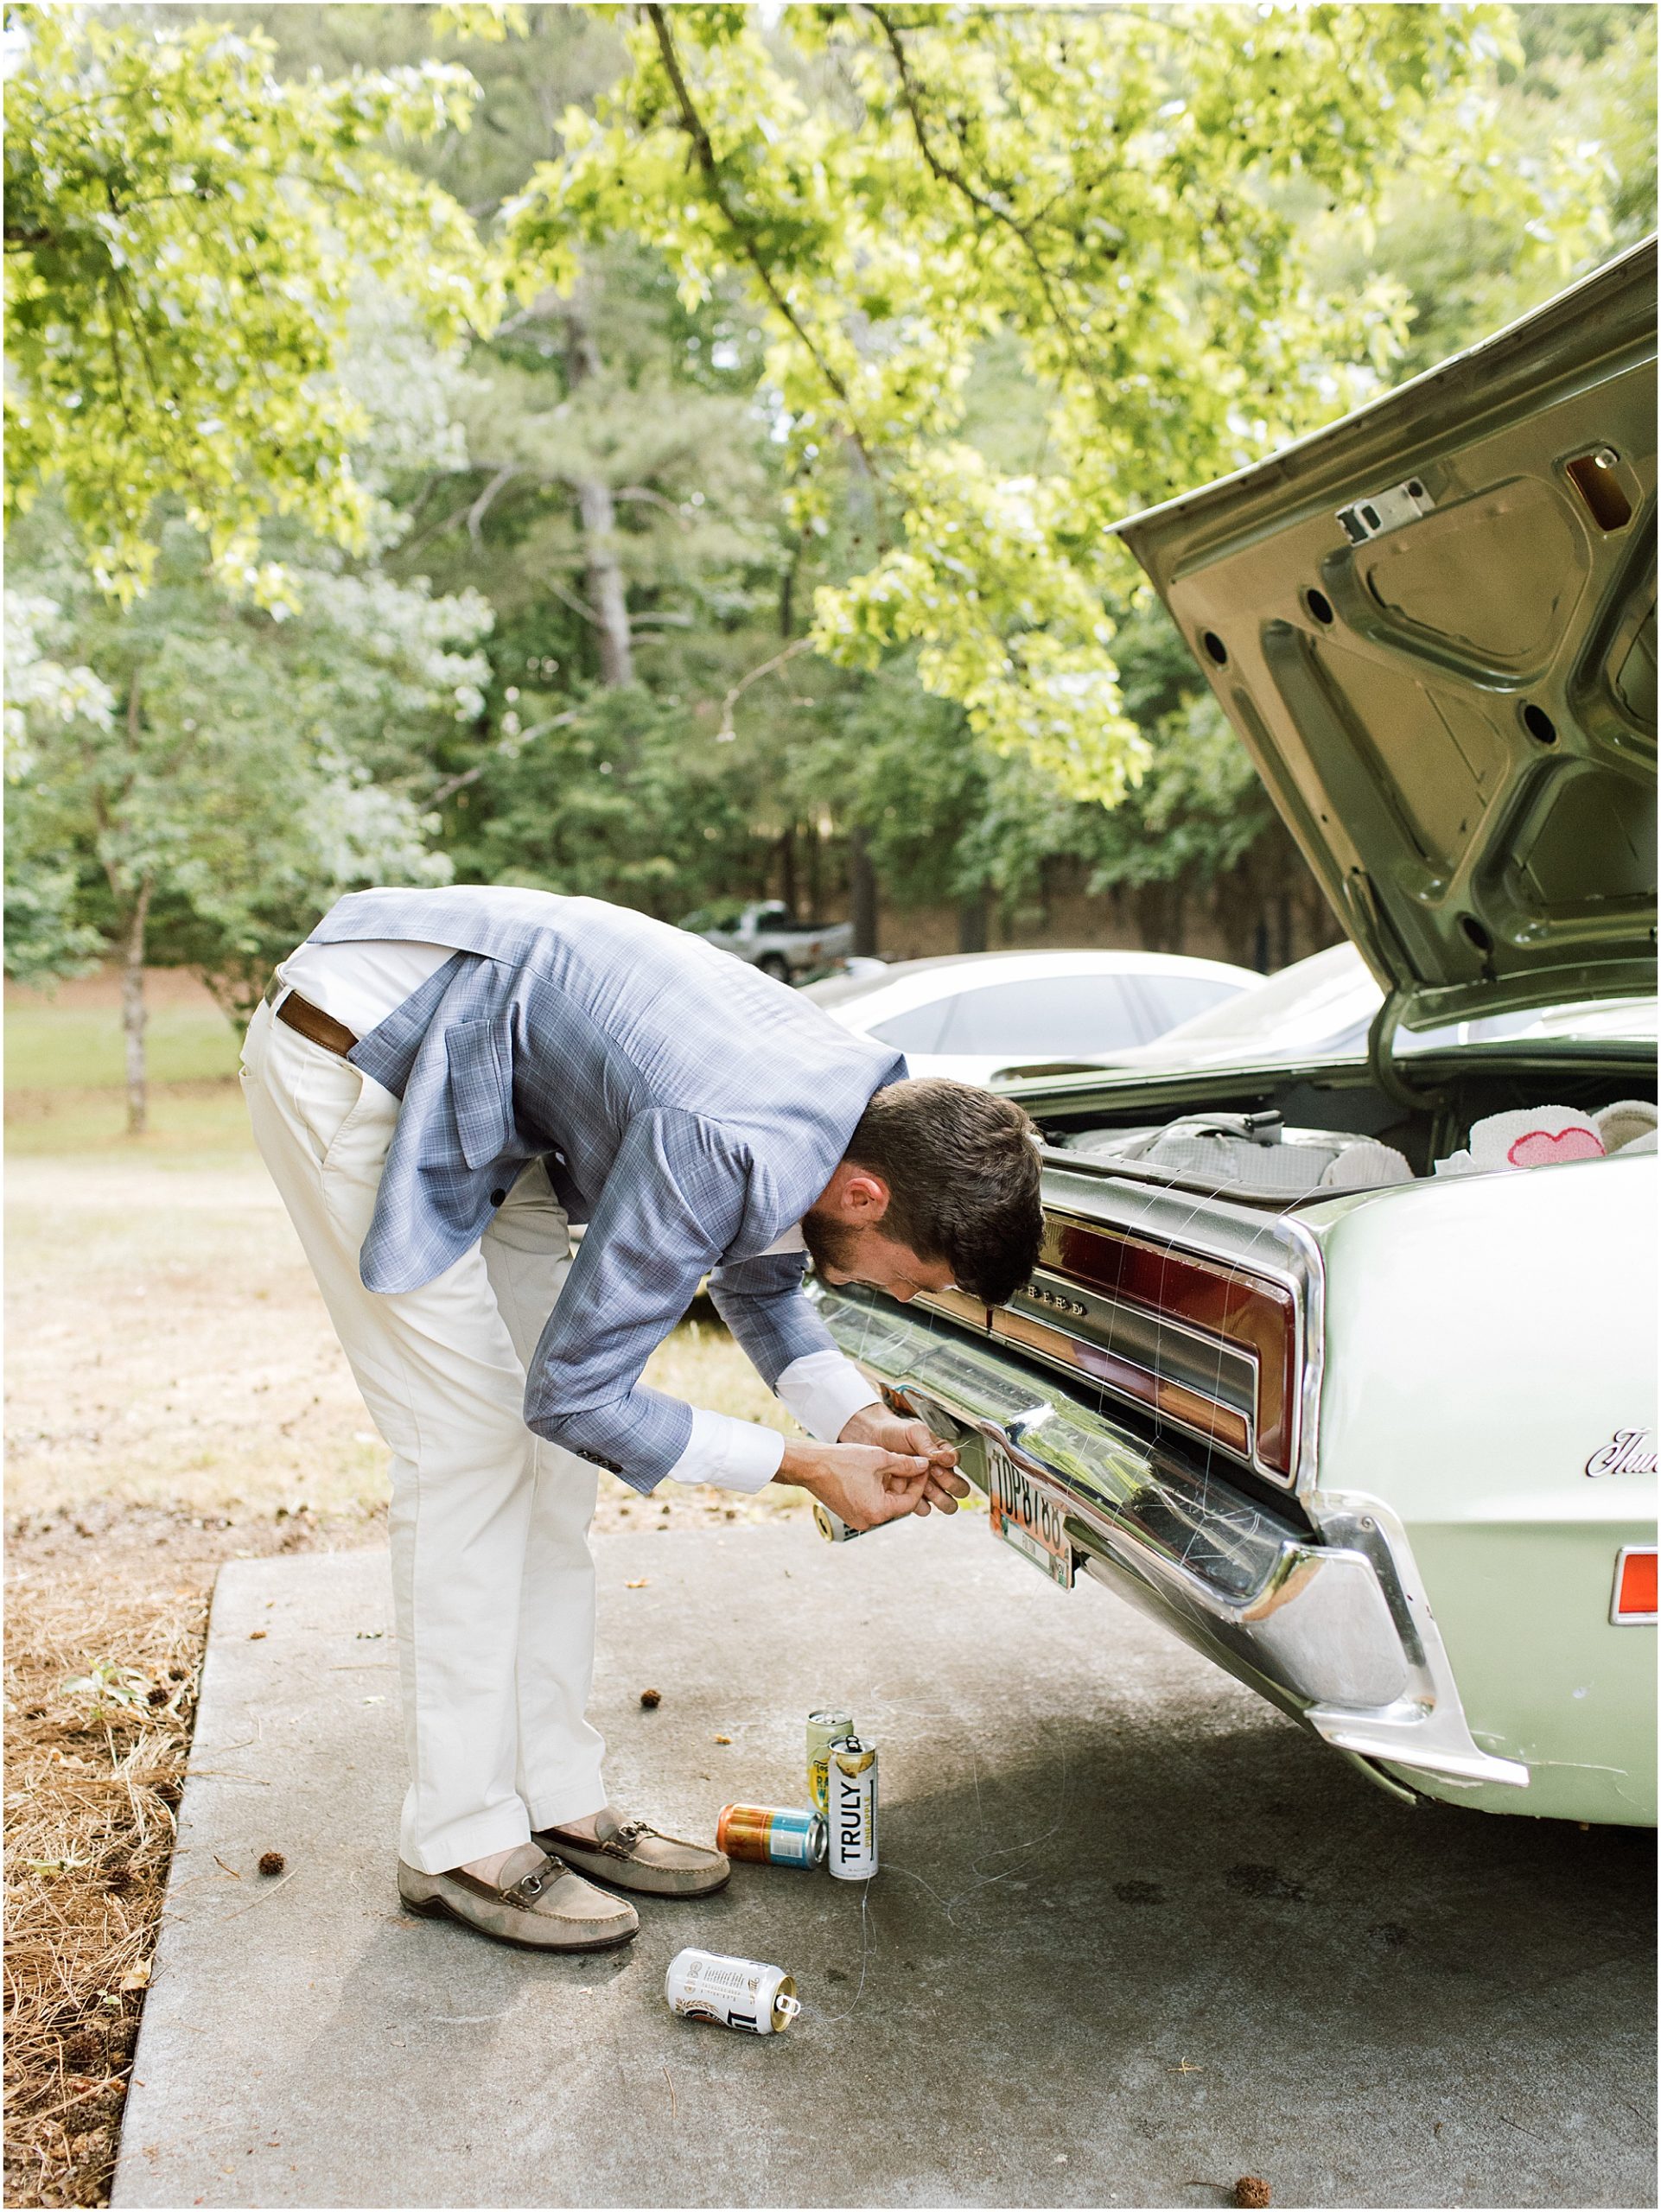 Wedding guest ties cans to back of the getaway car.